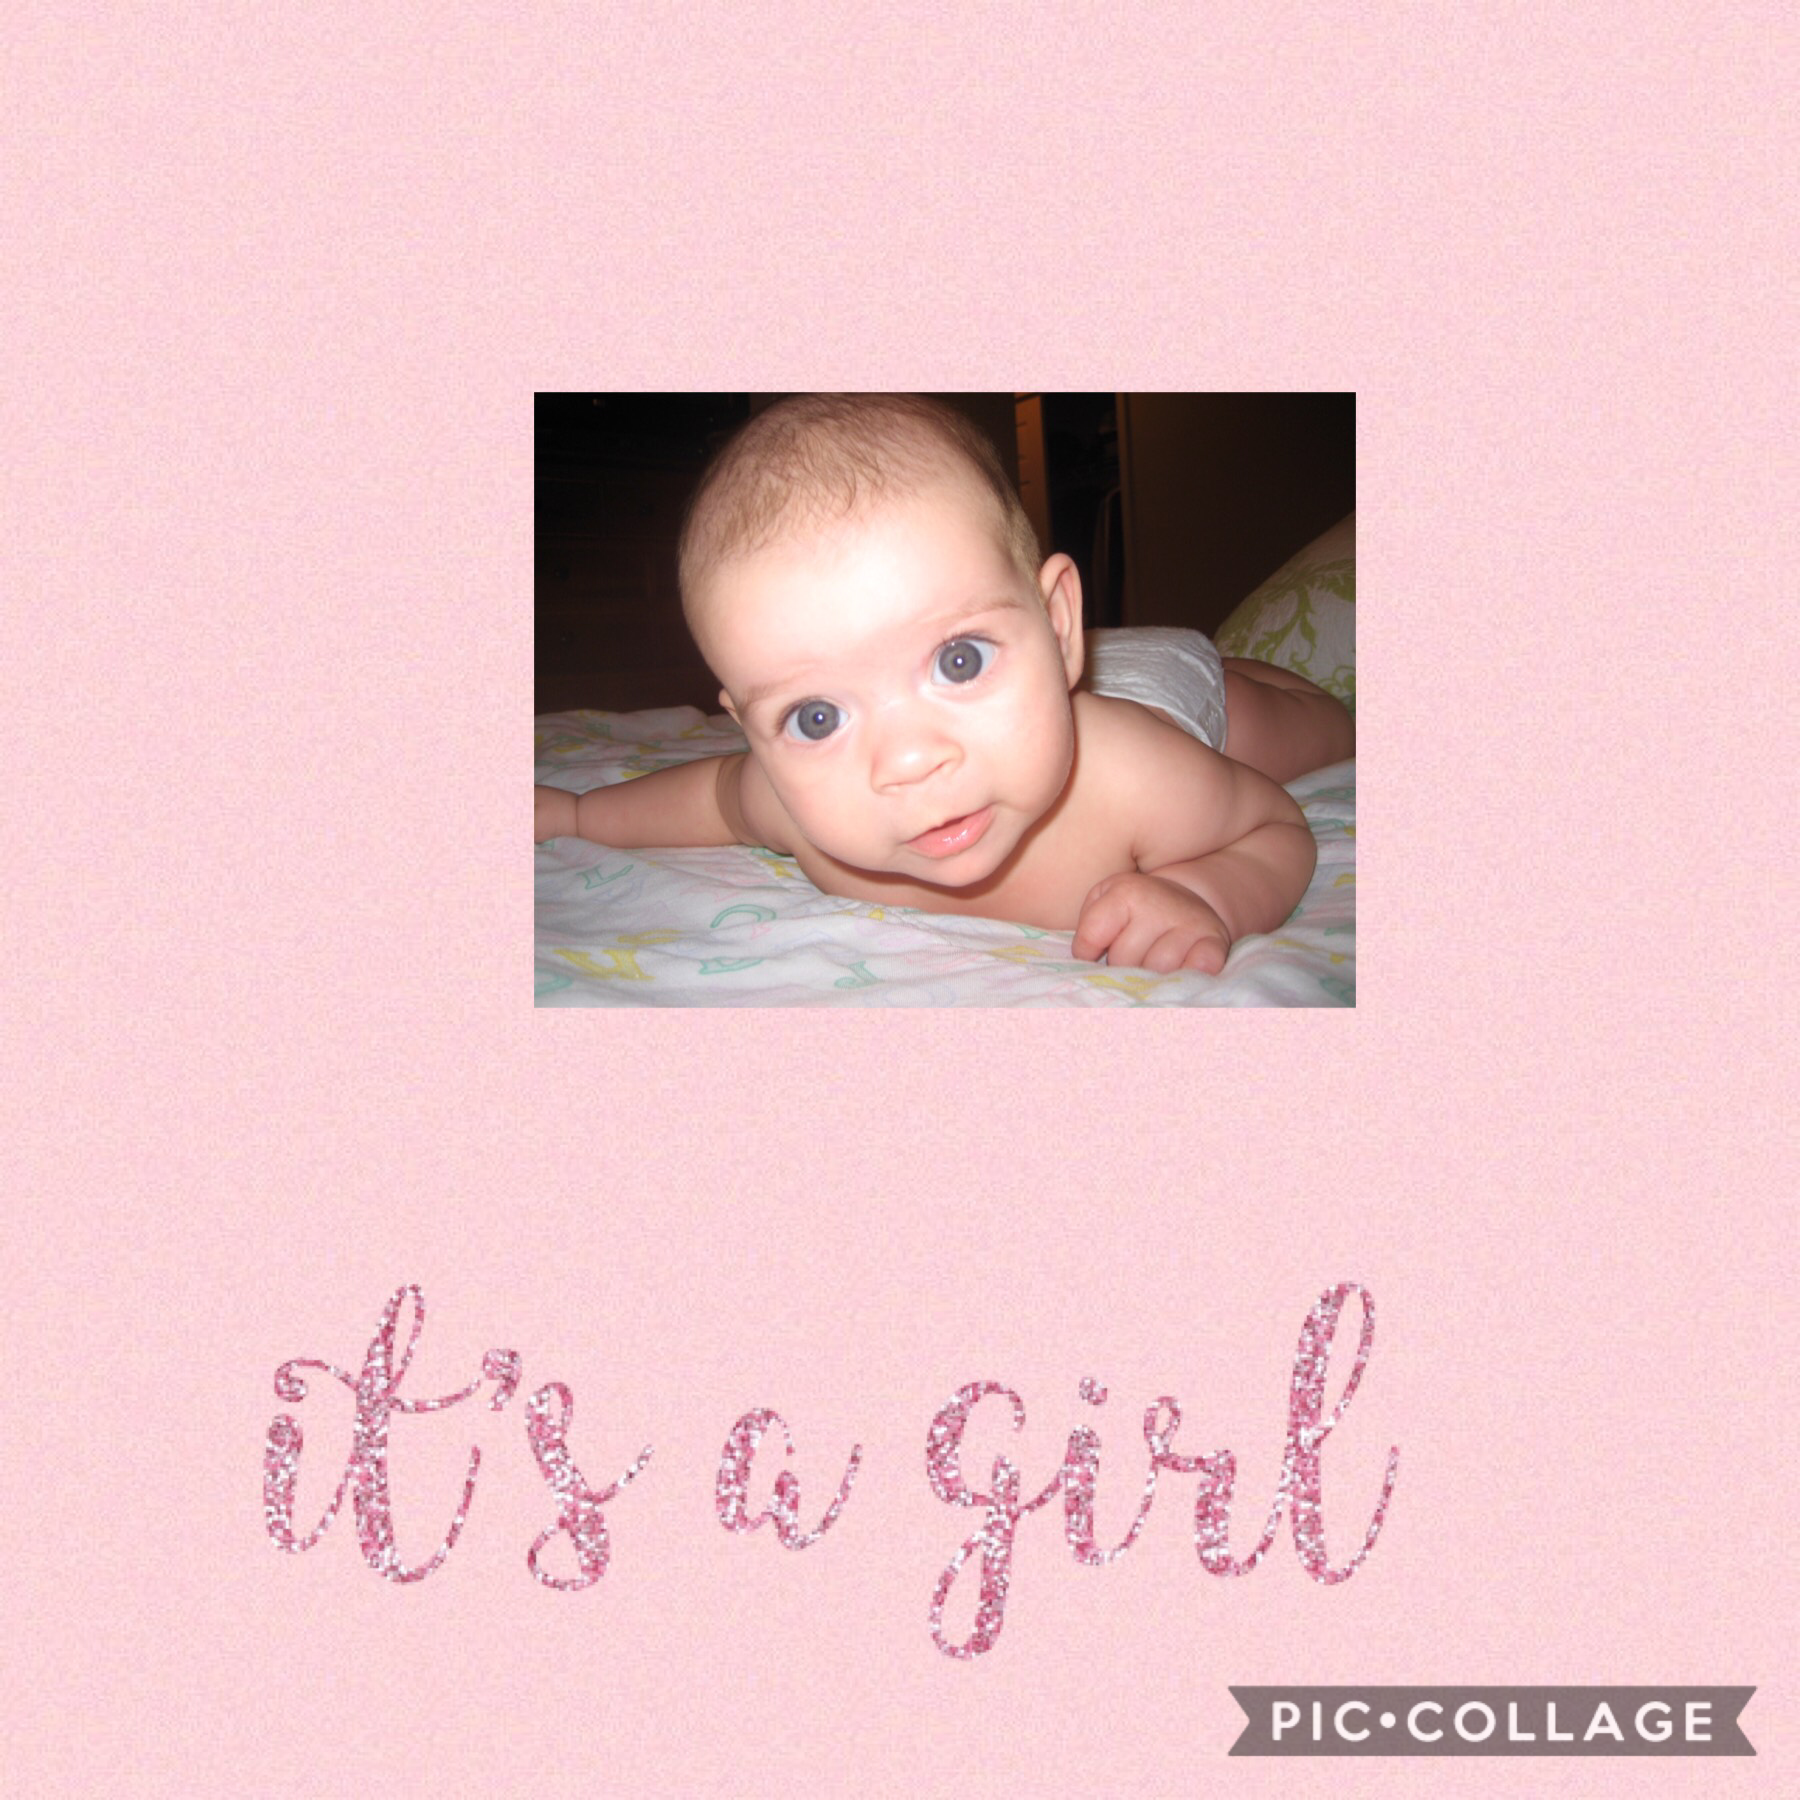 yay it’s a girl and finally out